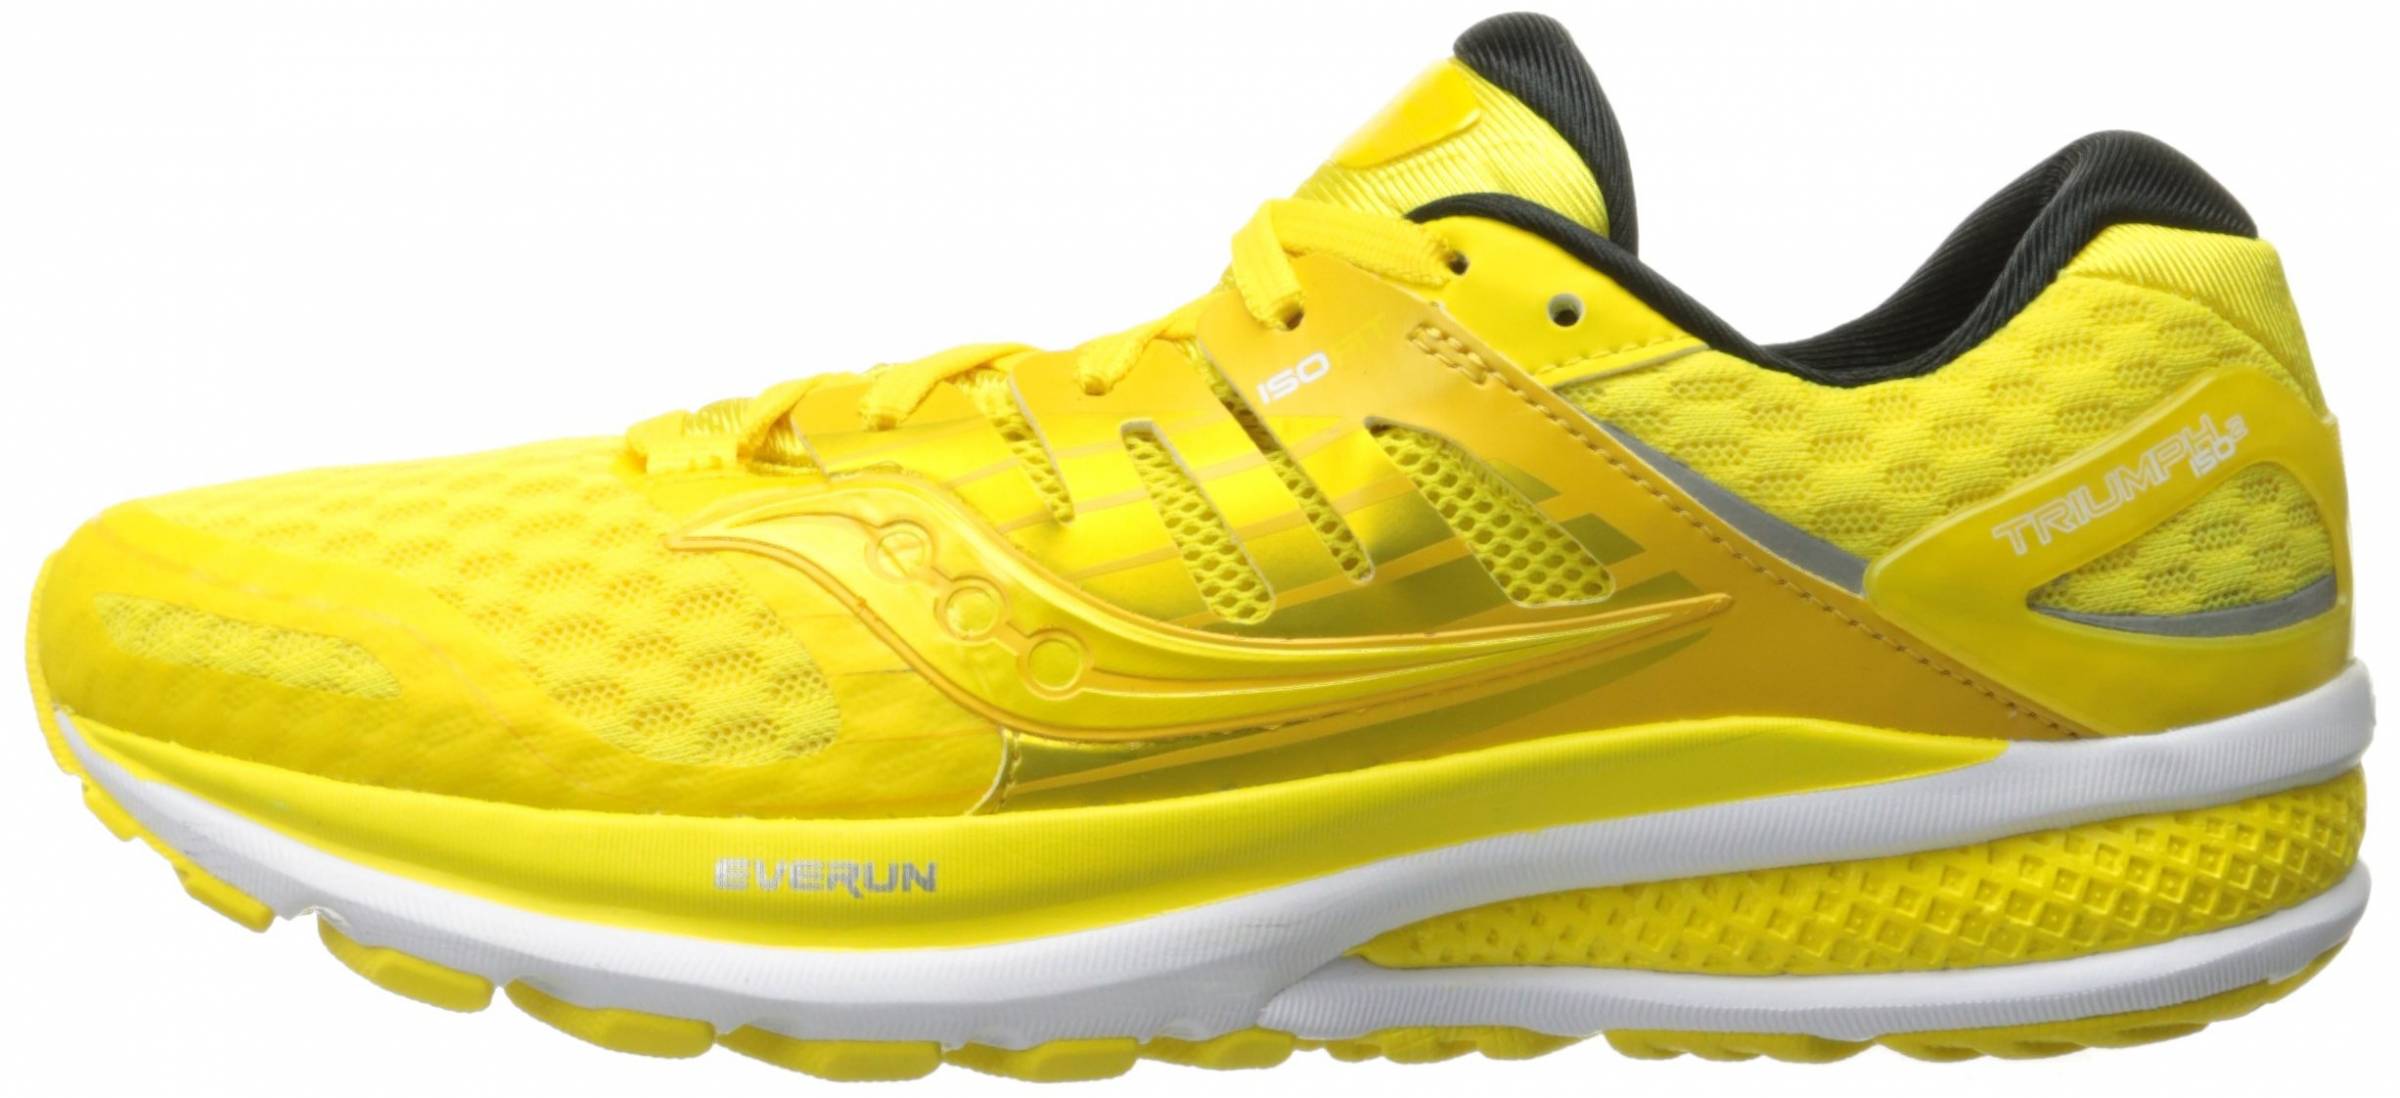 Saucony Triumph ISO 2 Review 2023, Facts, Deals ($54) | RunRepeat